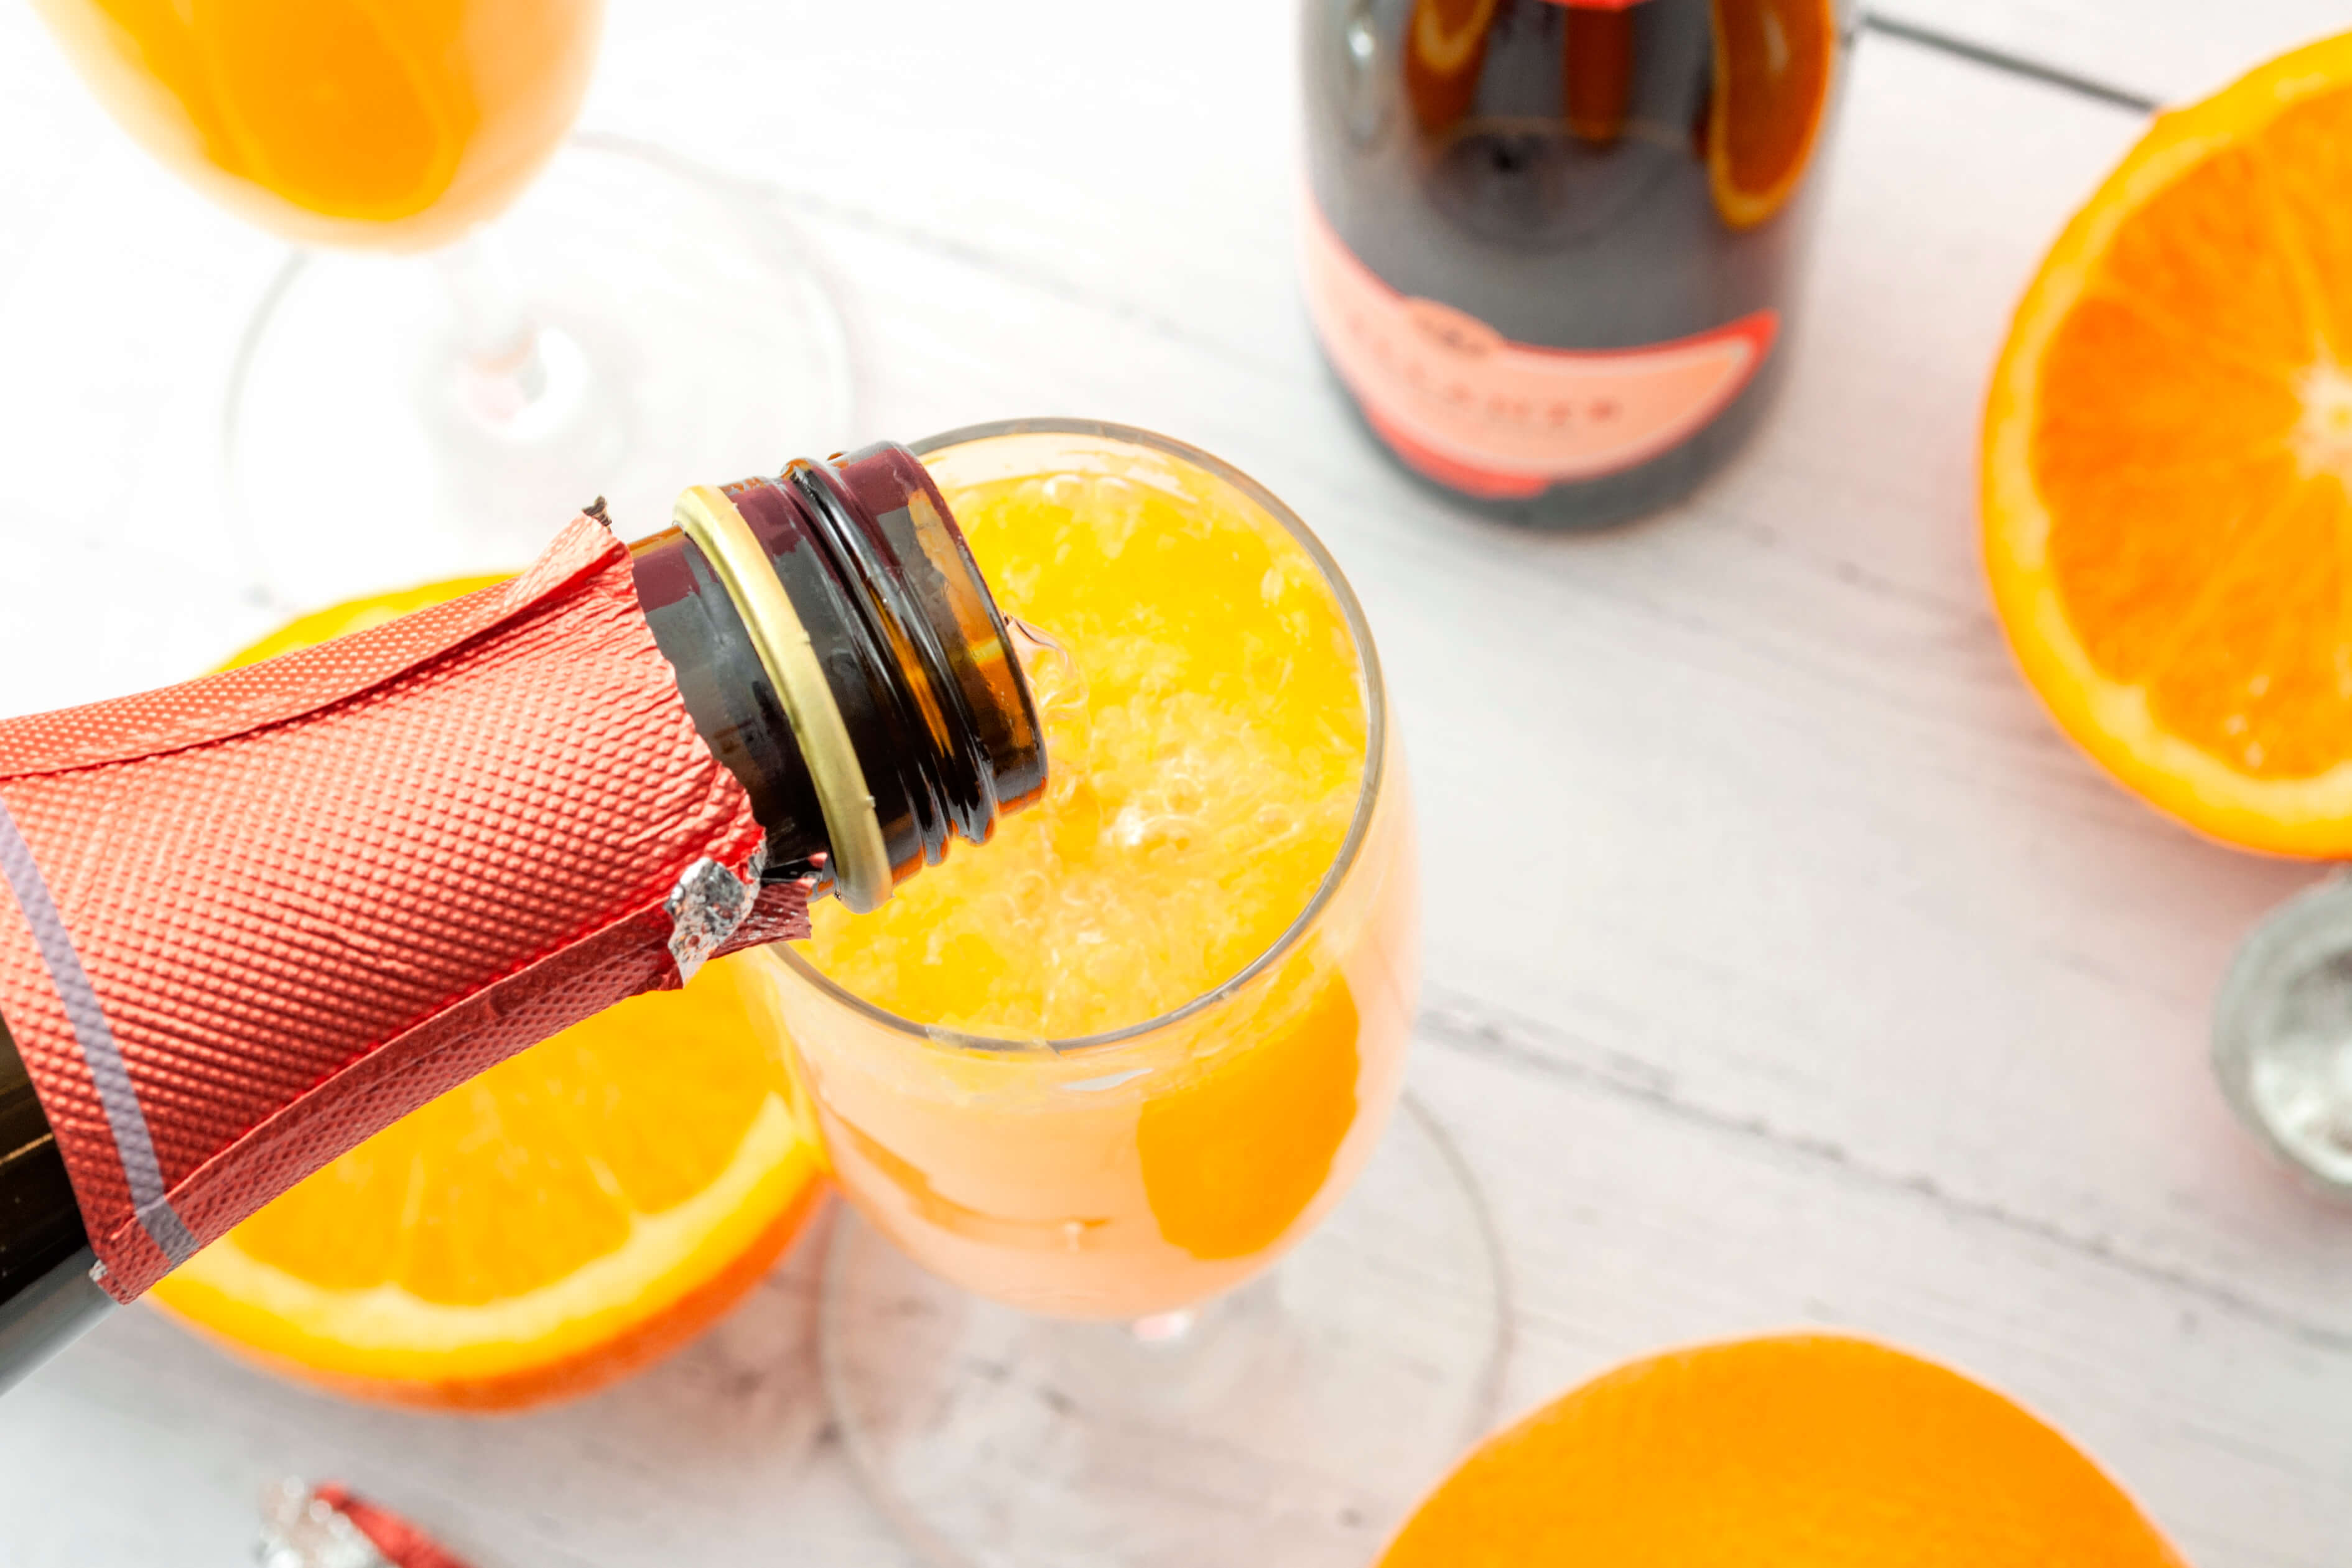 Mimosa and oranges